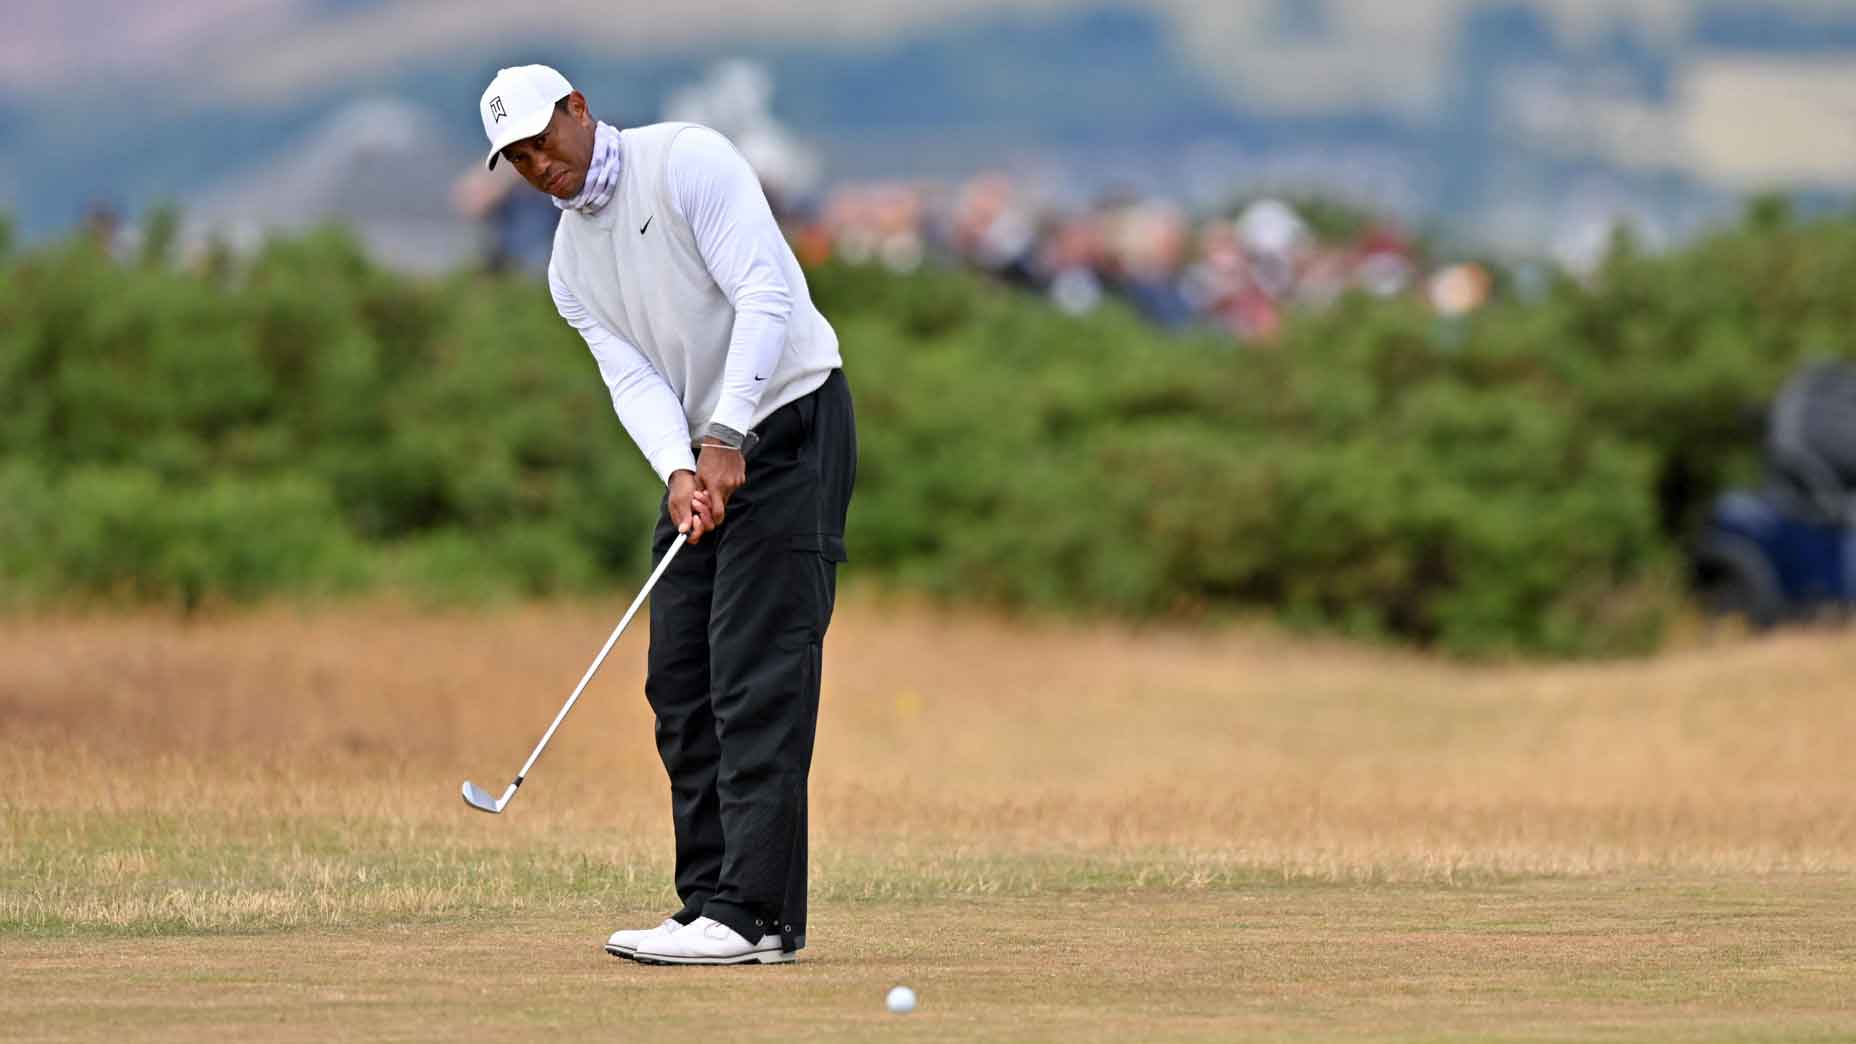 Tiger Woods chips onto the 9th green during his second round on the day 2 of The 150th British Open Golf Championship on The Old Course at St Andrews in Scotland on July 15, 2022